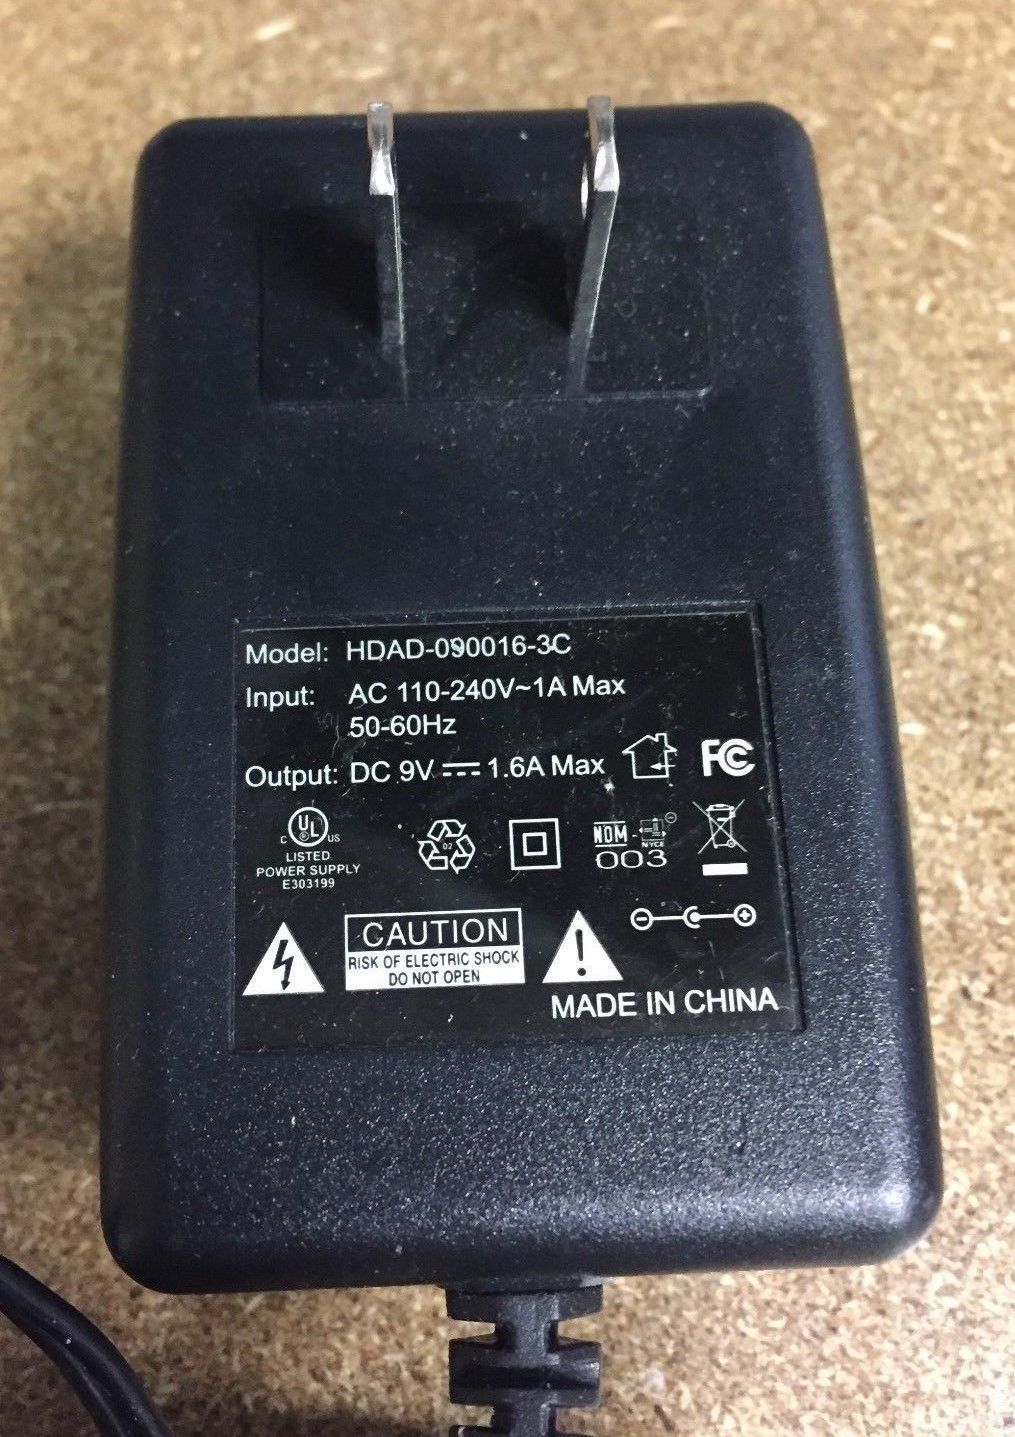 NEW 9V 1.6A HDAD-090016-3C AC Adapter For DAEWOO Portable DVD Player Dpc-8400n